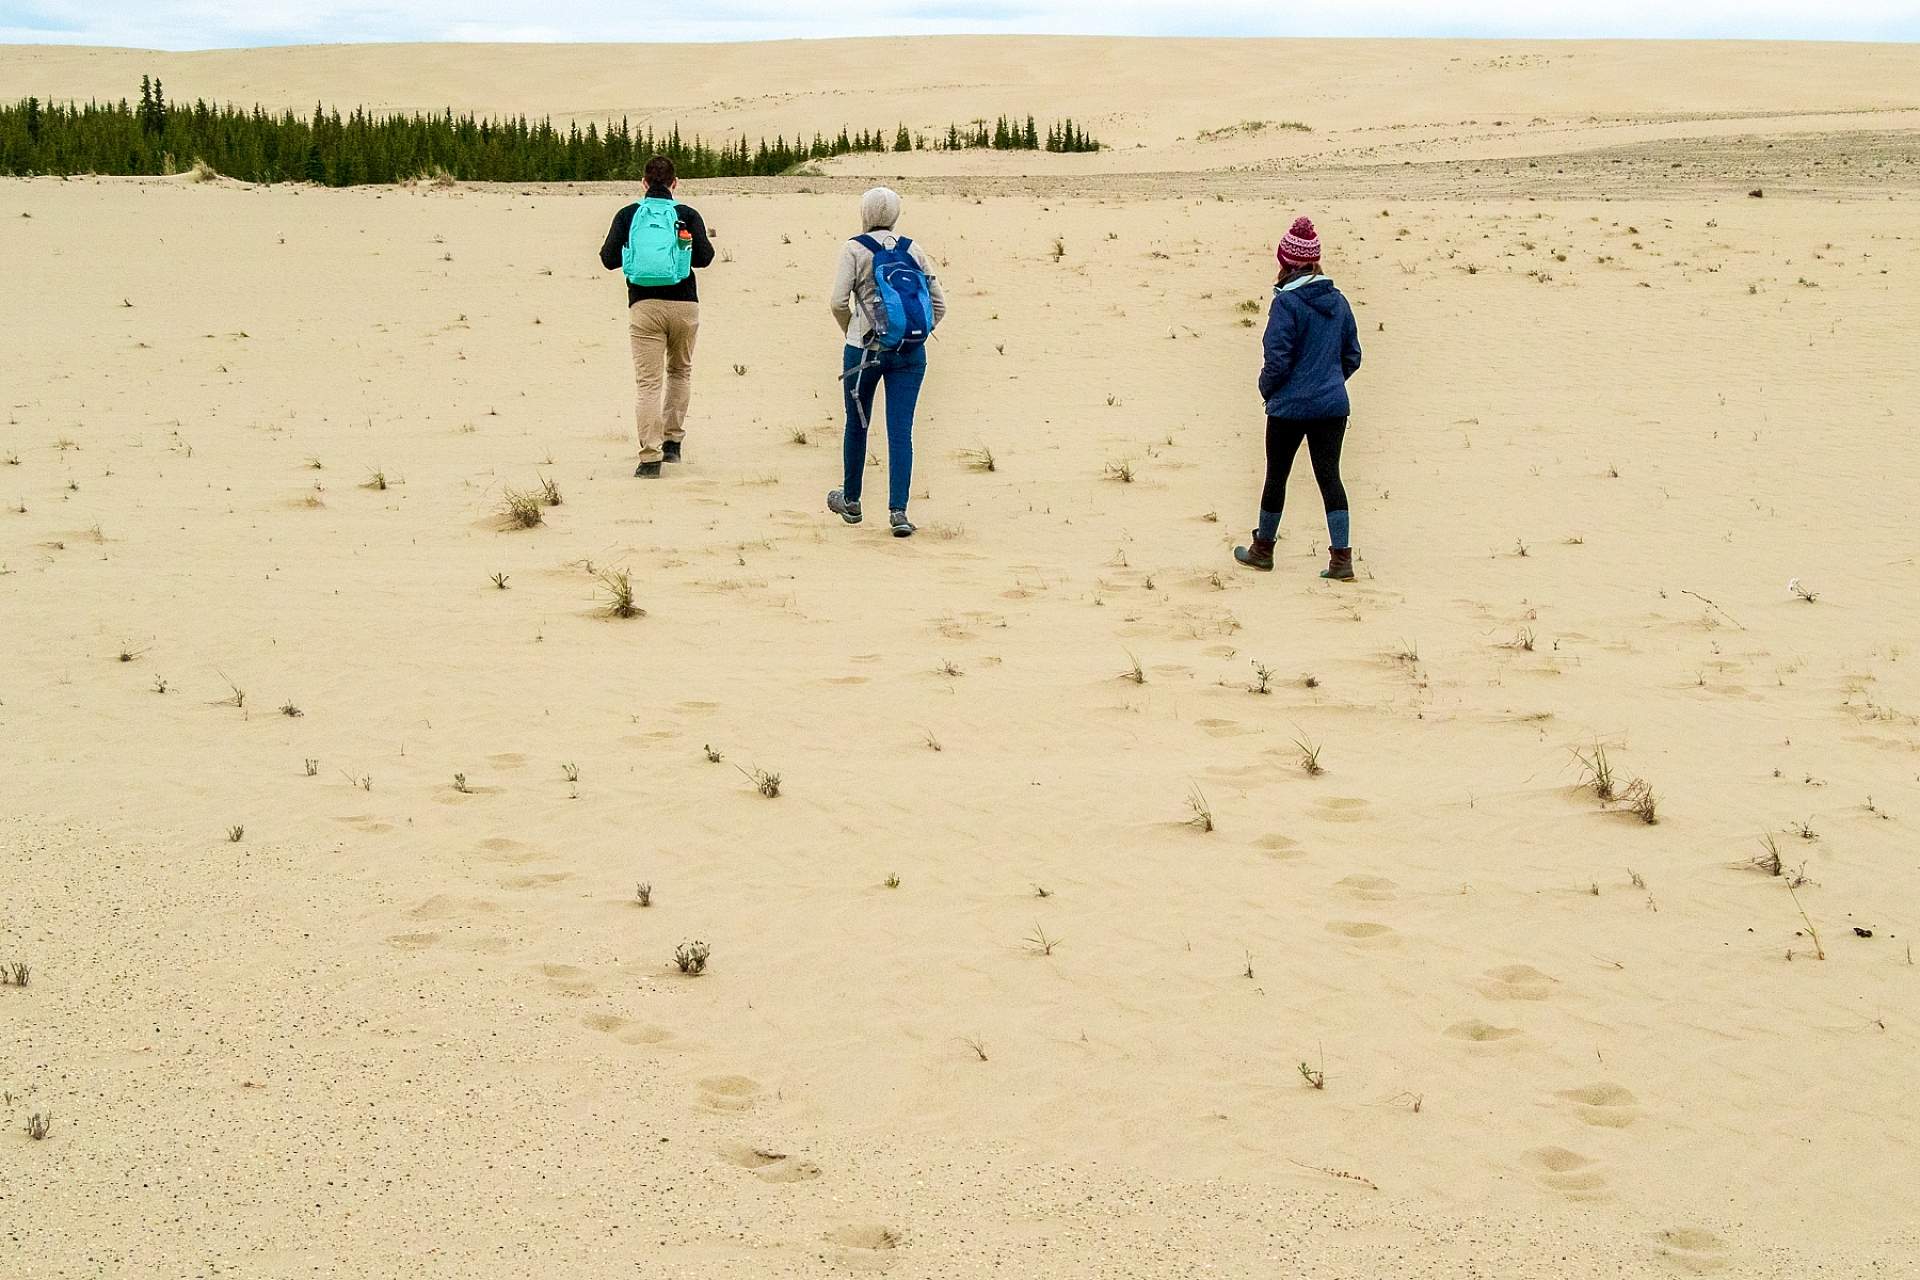 Alexyn and friends walk across the sand dunes in Kobuk Valley national Park